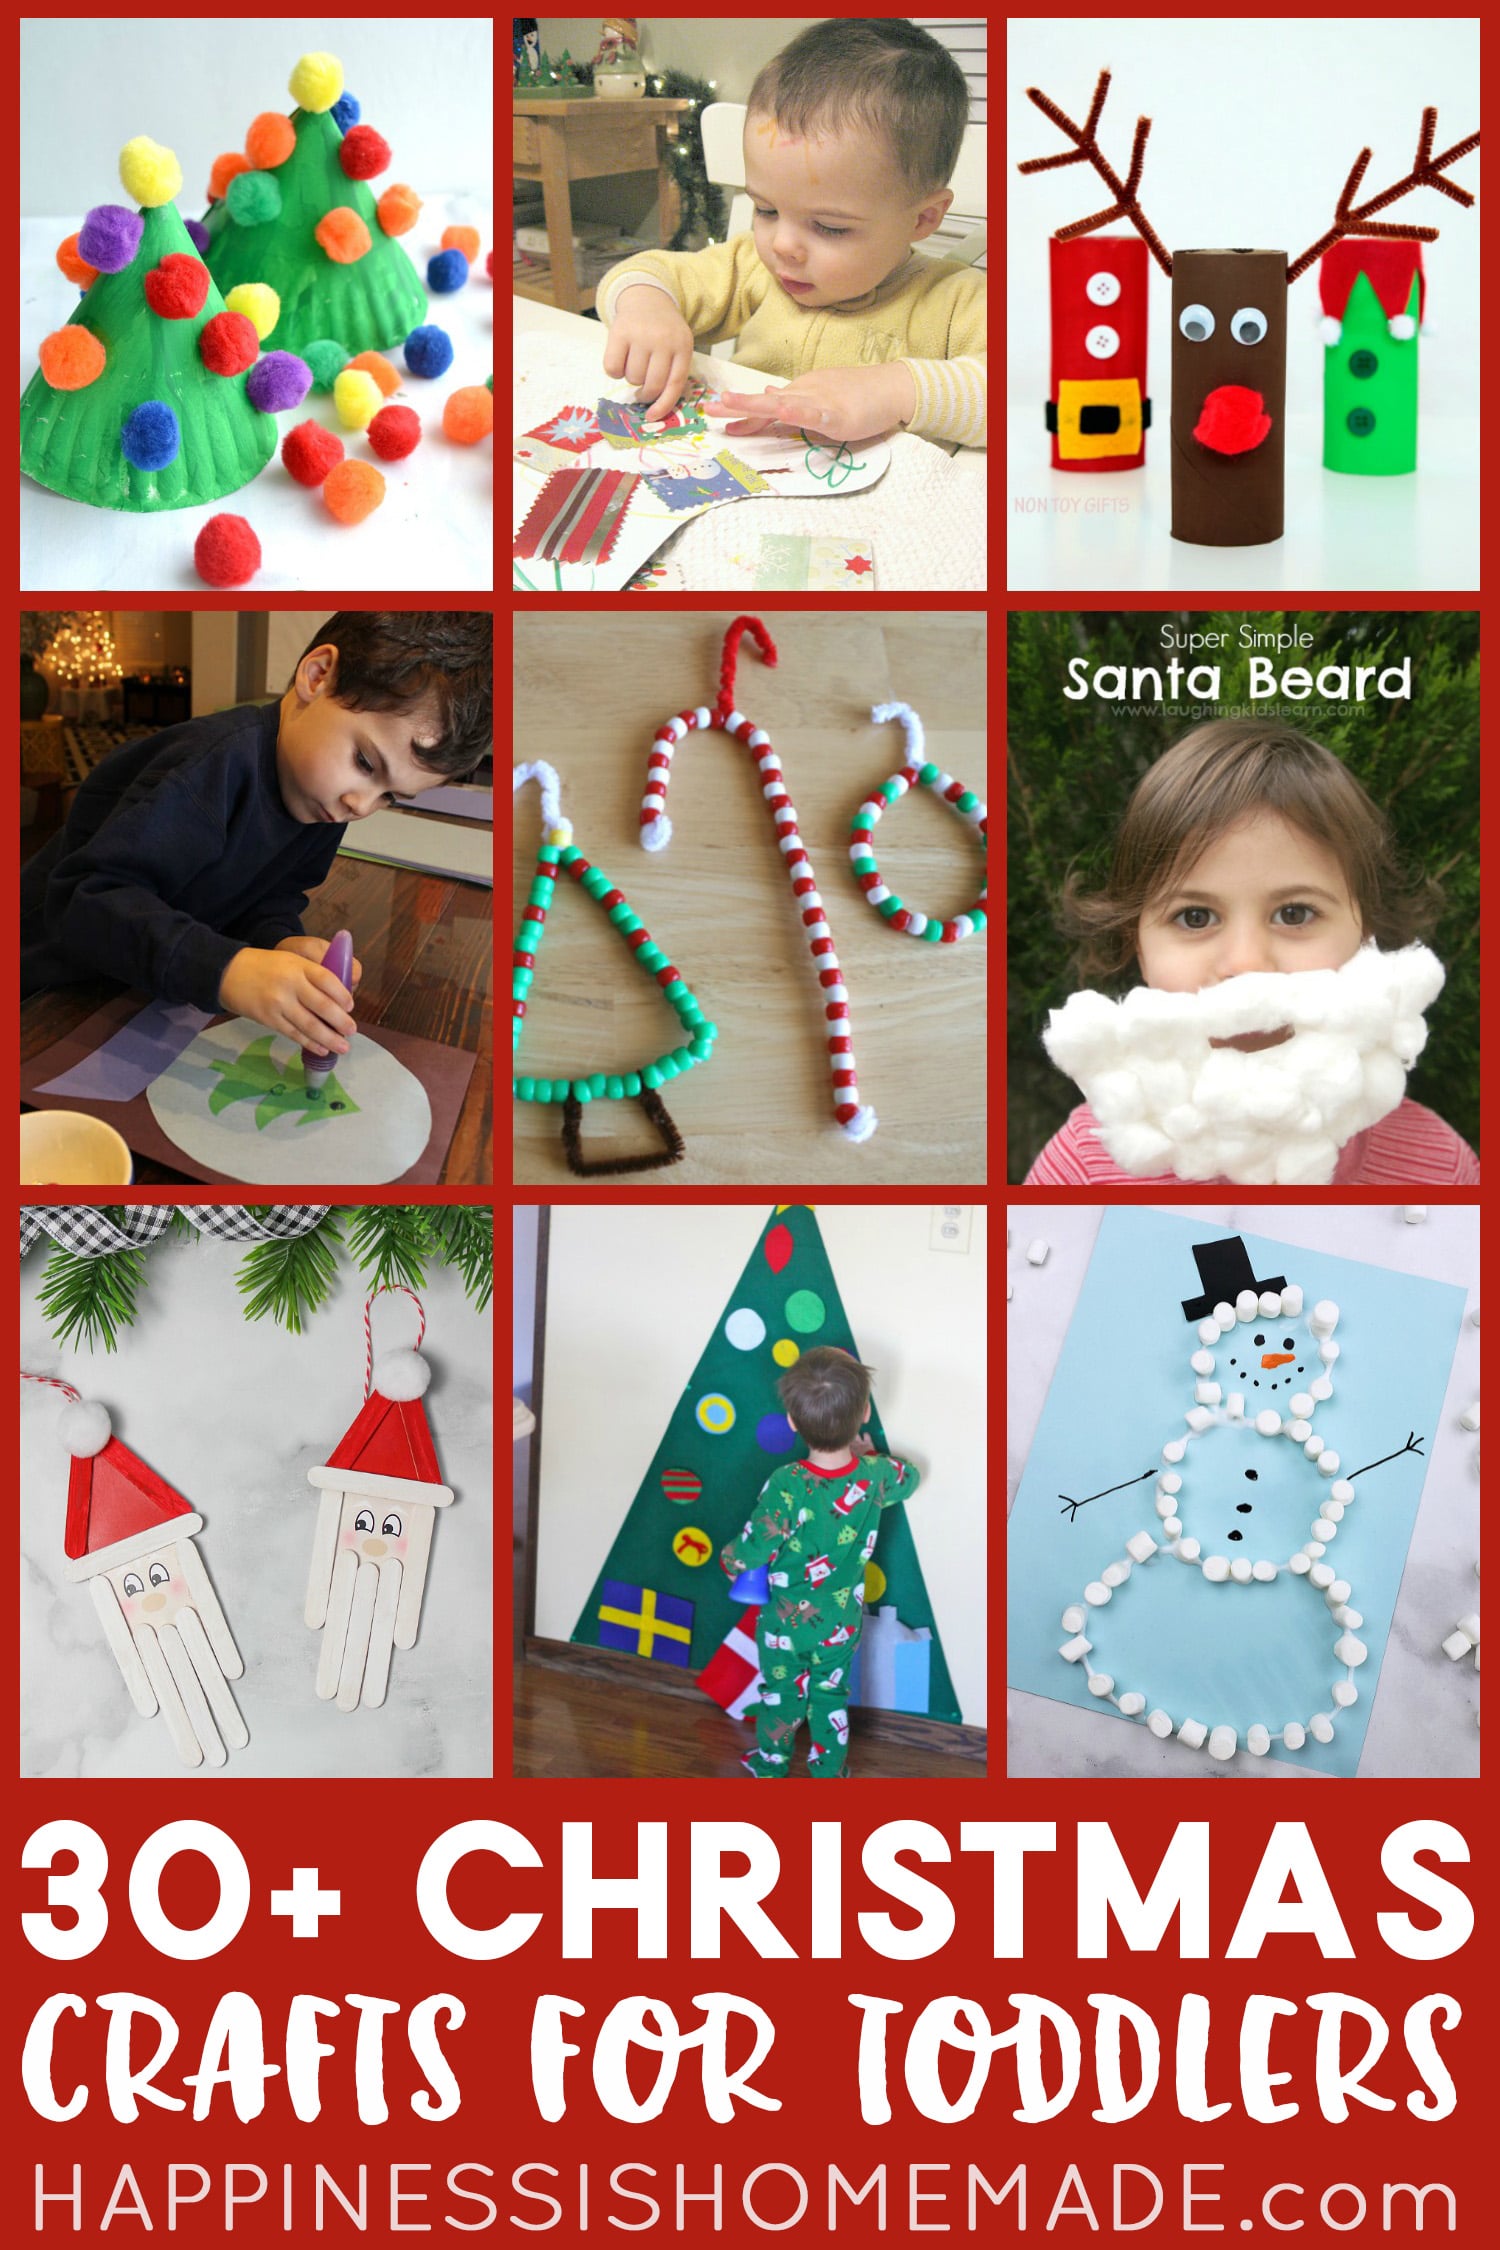 30+ Christmas Crafts for Toddlers and Preschoolers